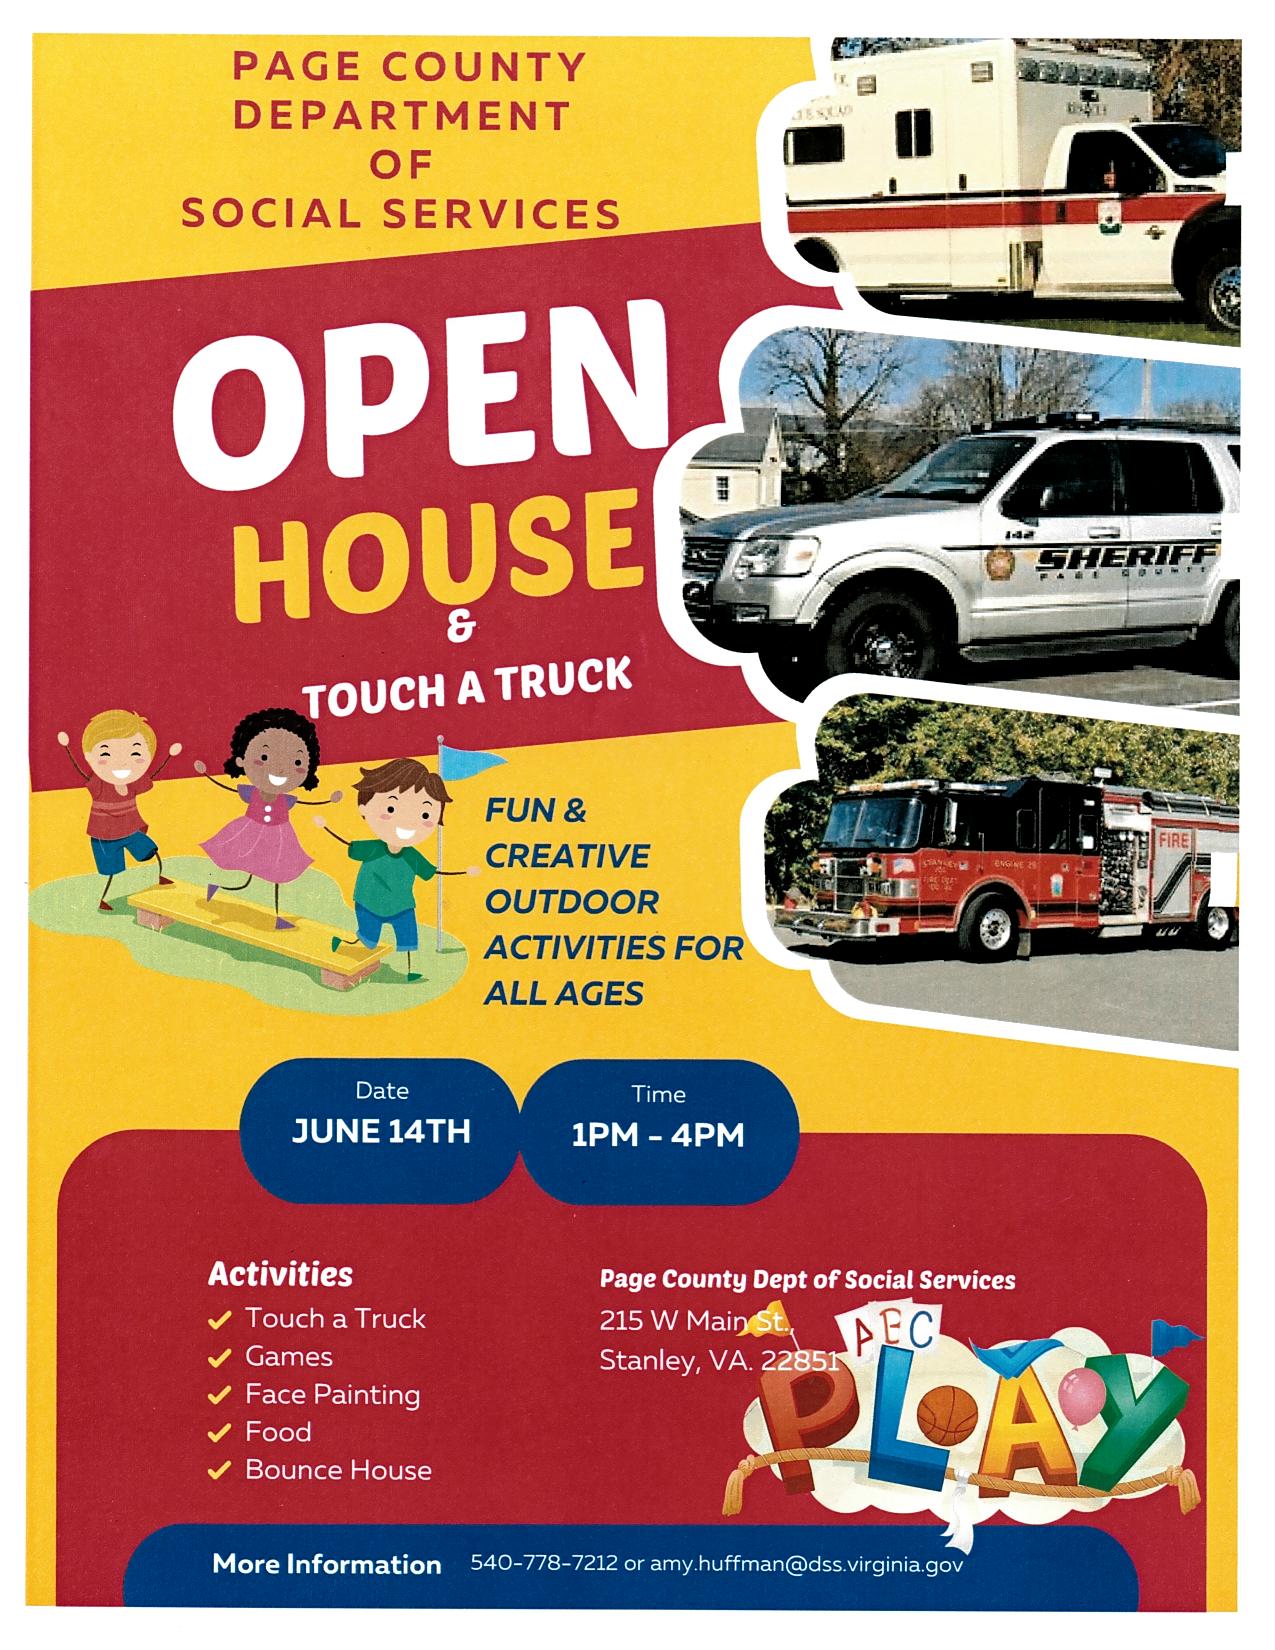 page-county-department-of-social-services-open-house-luray-page